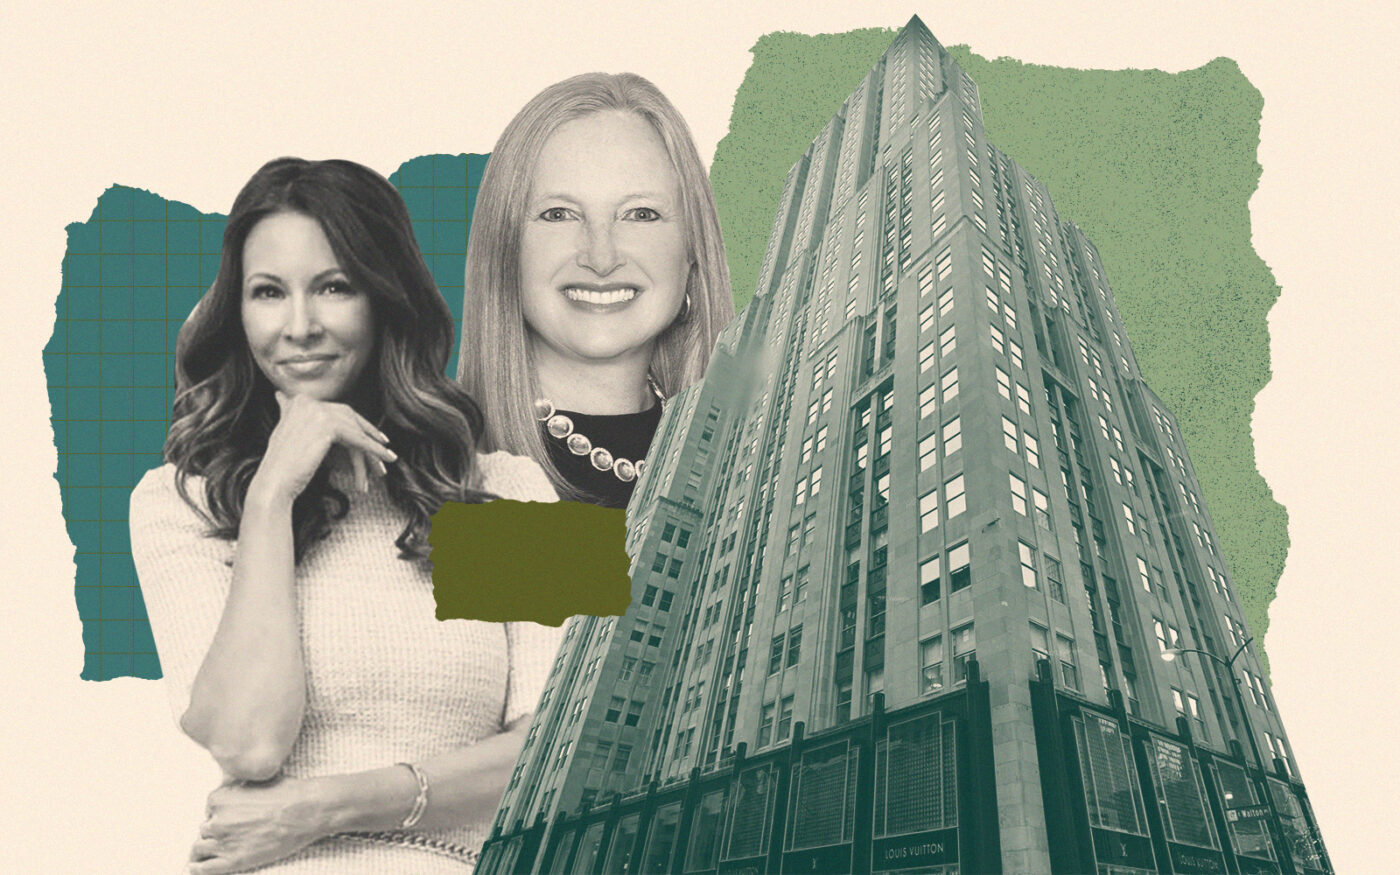 @properties' Carrie McCormick and Engel and Volkers' Jennifer Ames with the Palmolive Building